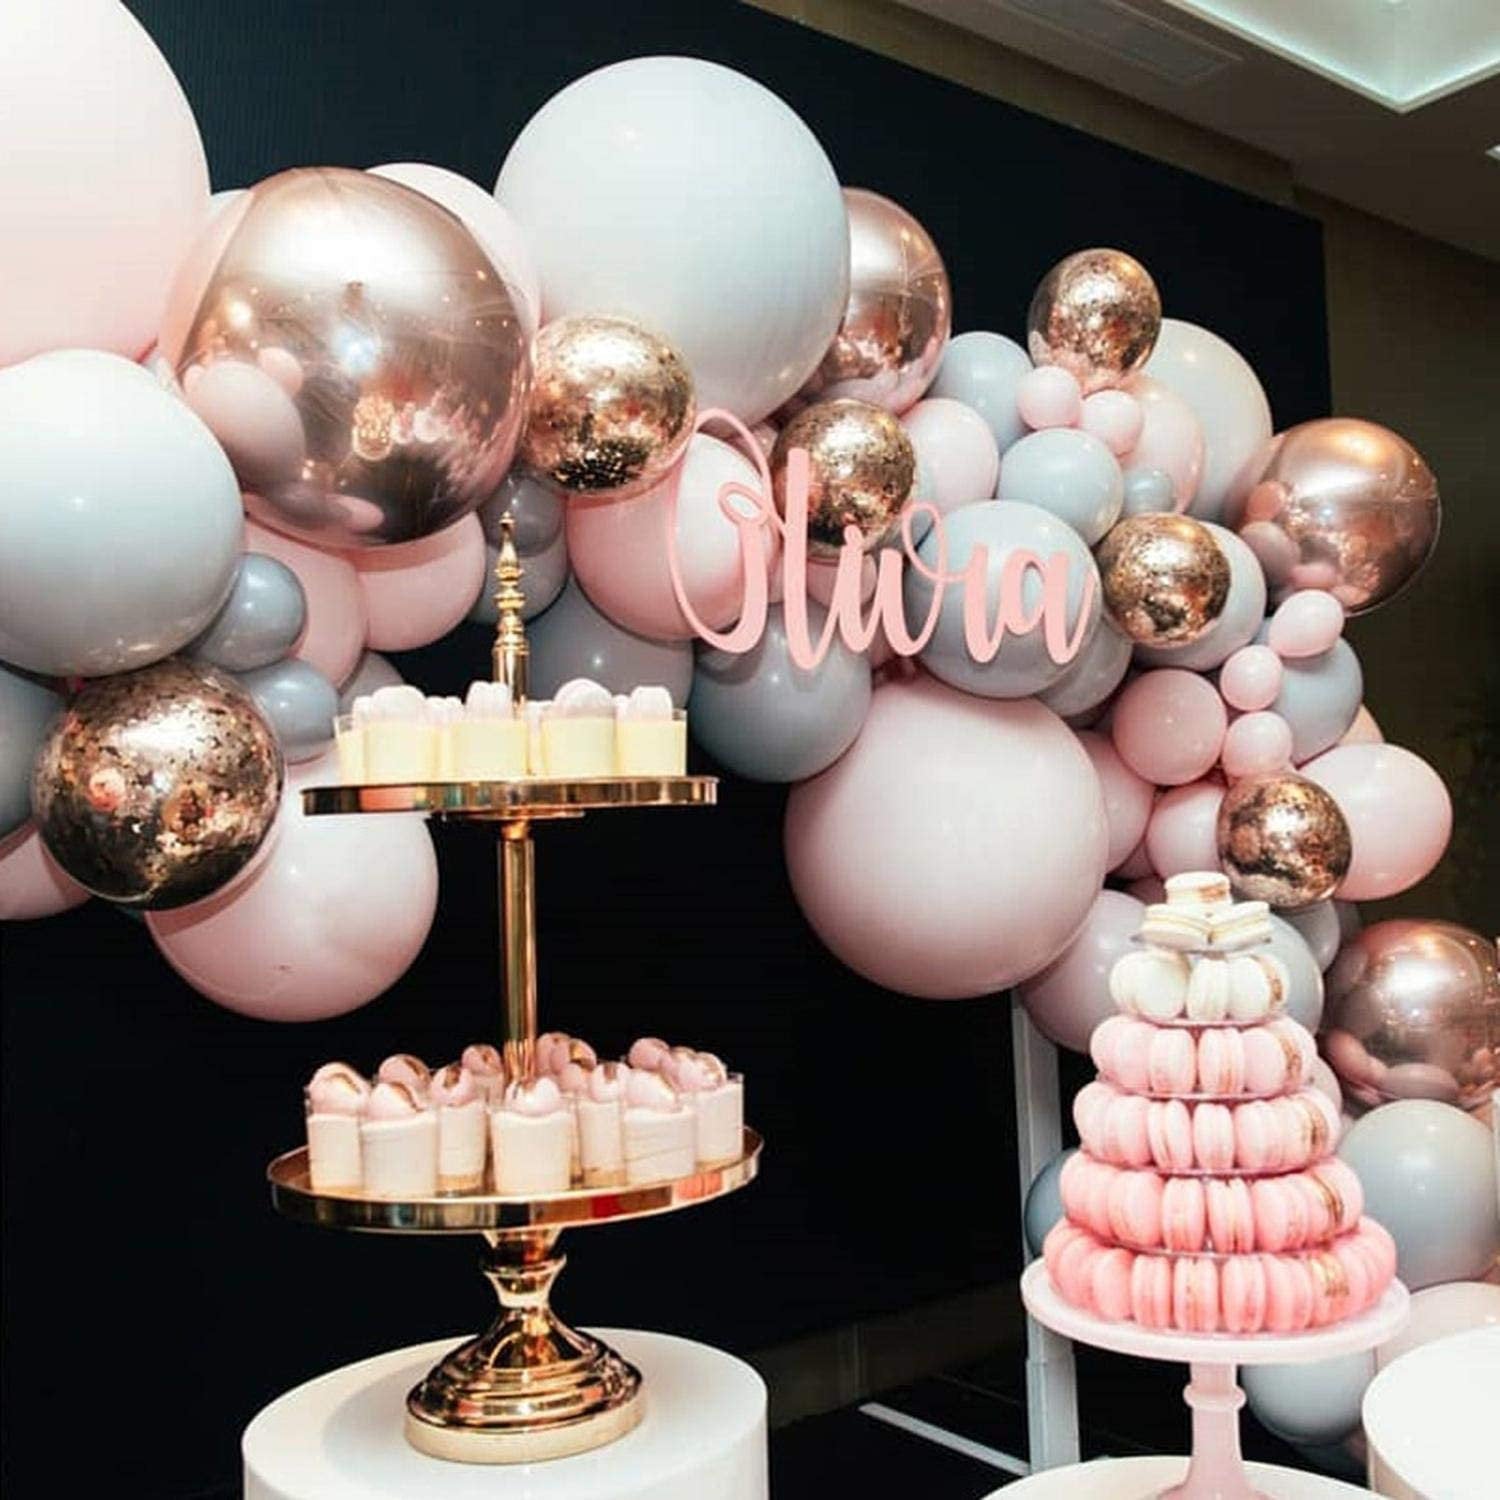 Rose Gold Balloon Arch - Pink & Gray Balloon Garland Kit - Ellie's Party Supply